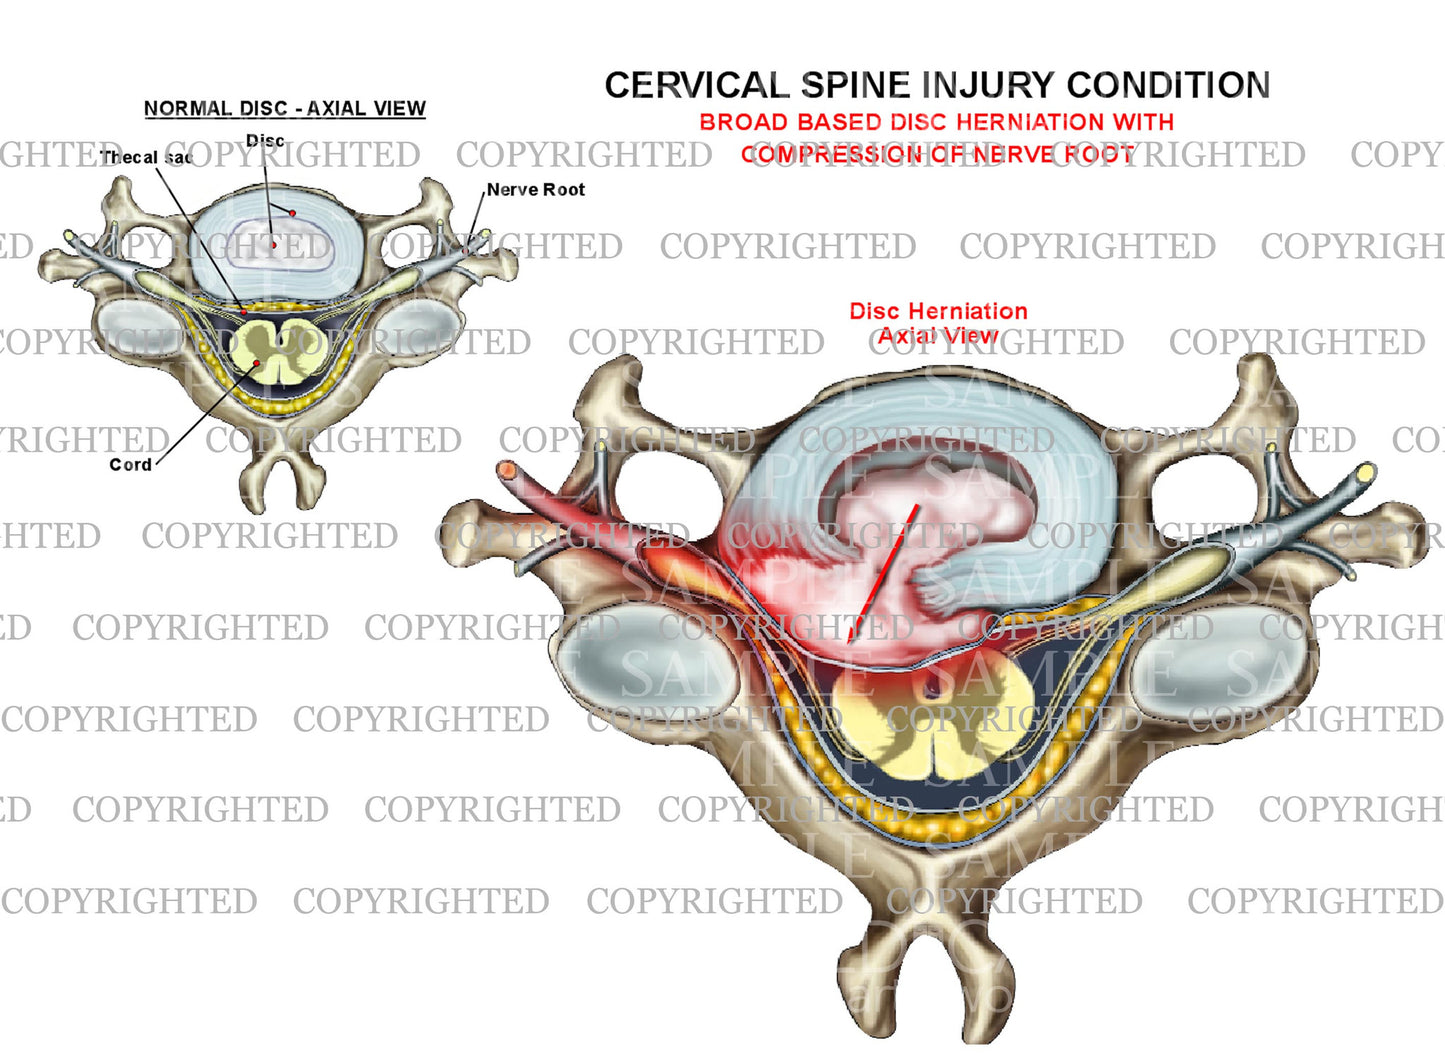 Cervical disc herniation + compression - axial view